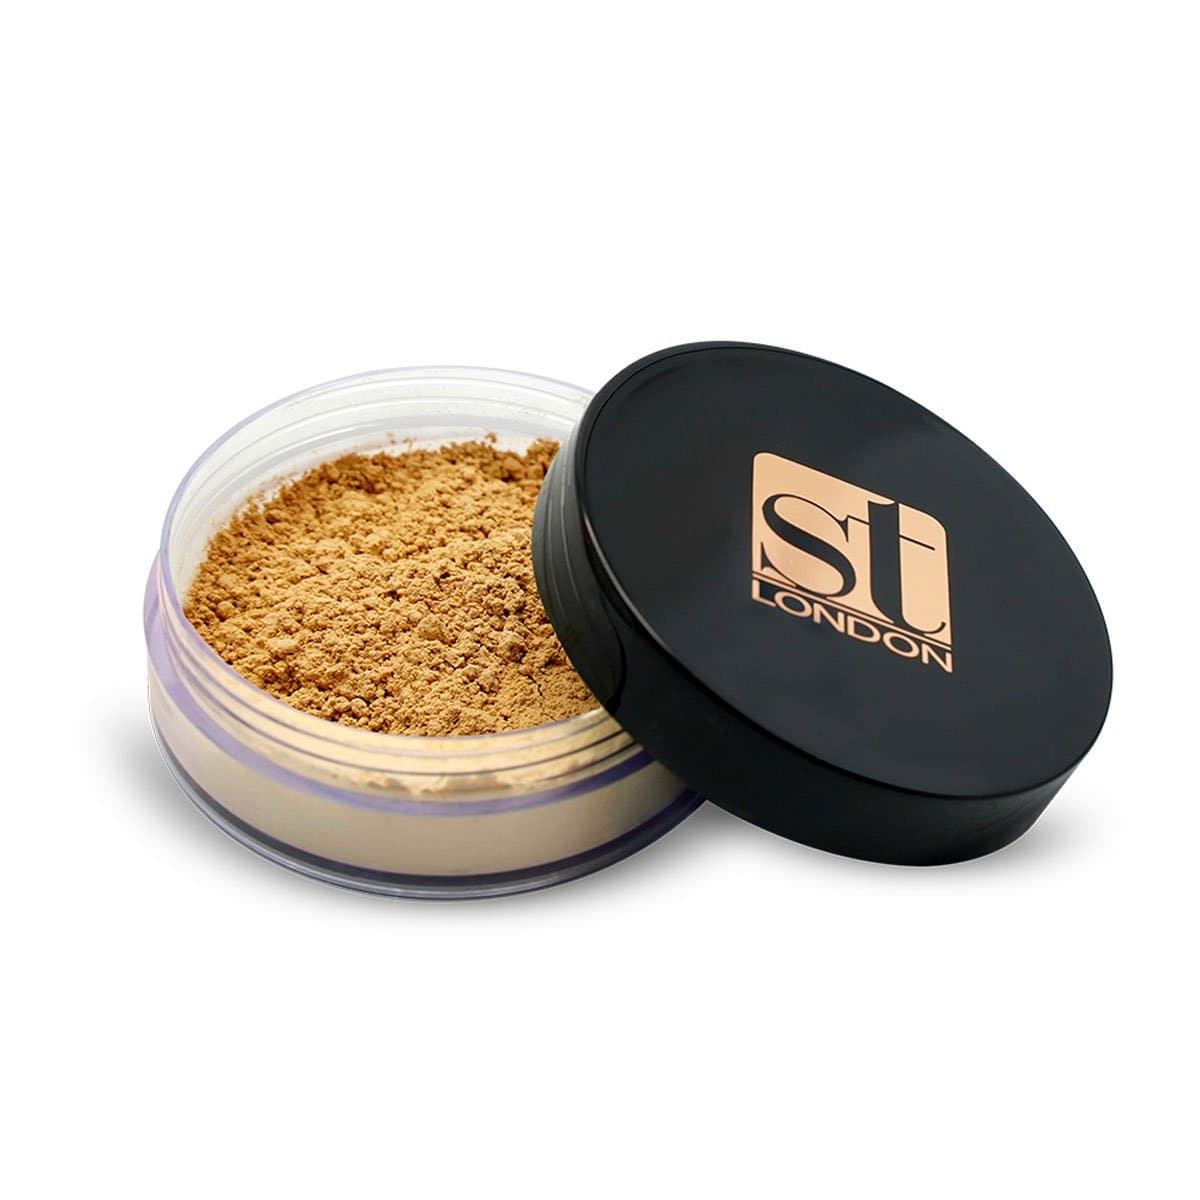 ST London Mineralz Loose Powder - Natural Fair - Premium Health & Beauty from St London - Just Rs 2640.00! Shop now at Cozmetica